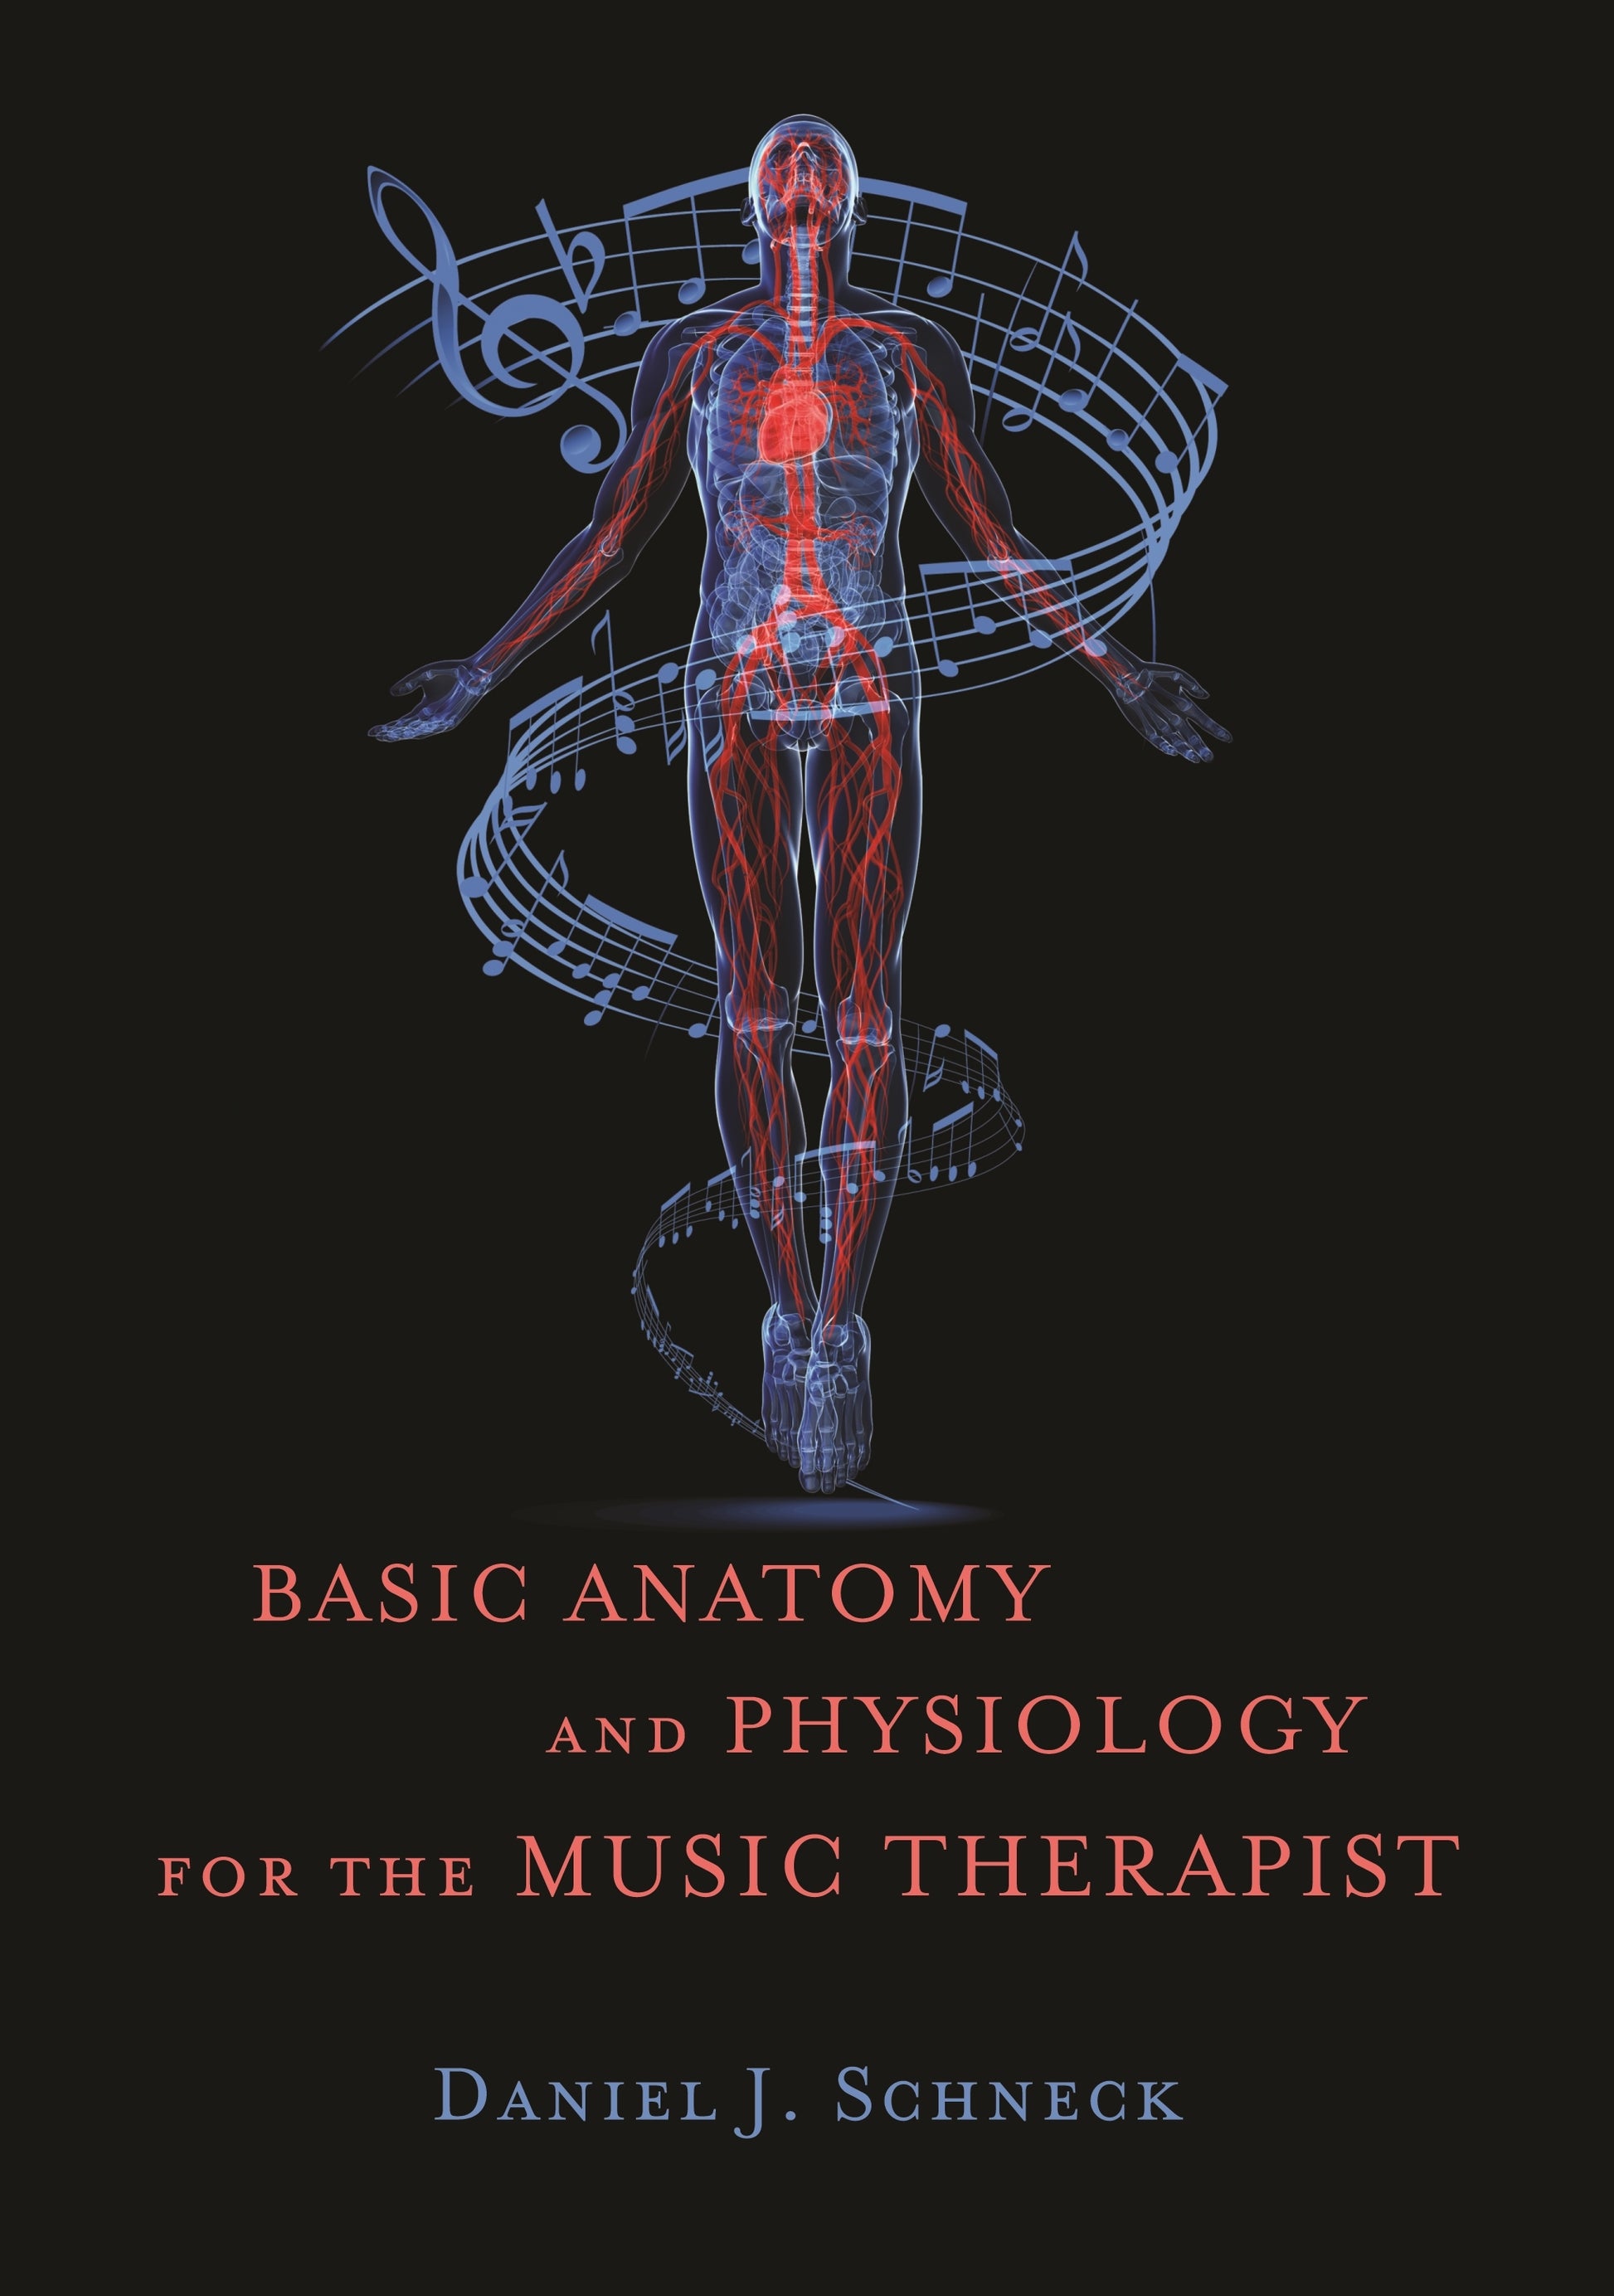 Basic Anatomy and Physiology for the Music Therapist by Daniel J. Schneck